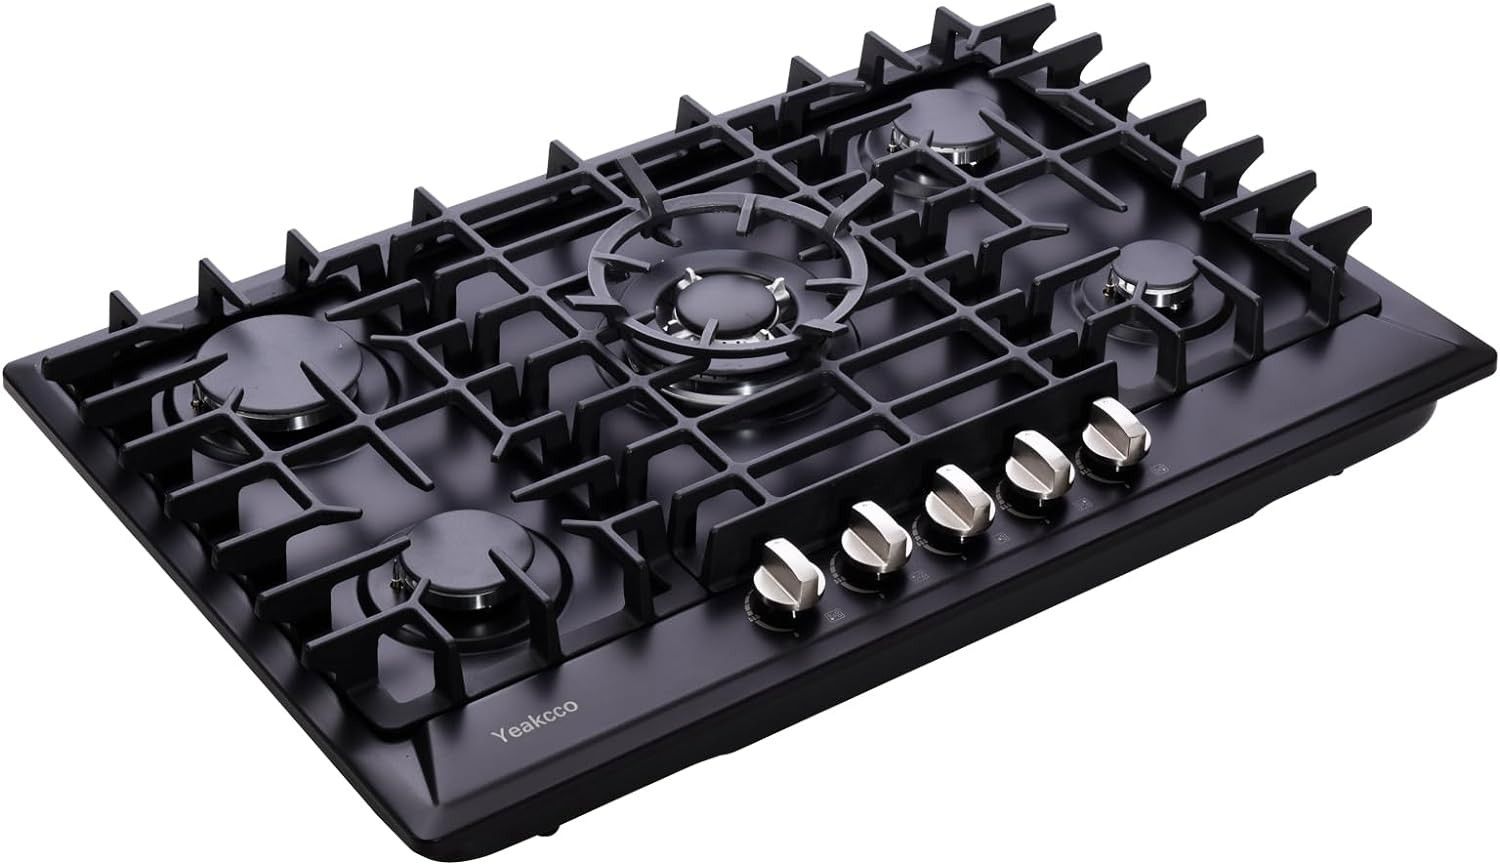 30 Inch Gas Cooktop, Built-in 5 Burners Stainless Steel Gas Stovetop Propane/Natural Gas Convertible Stove Top Dual Fuel Gas Hob (Black)

